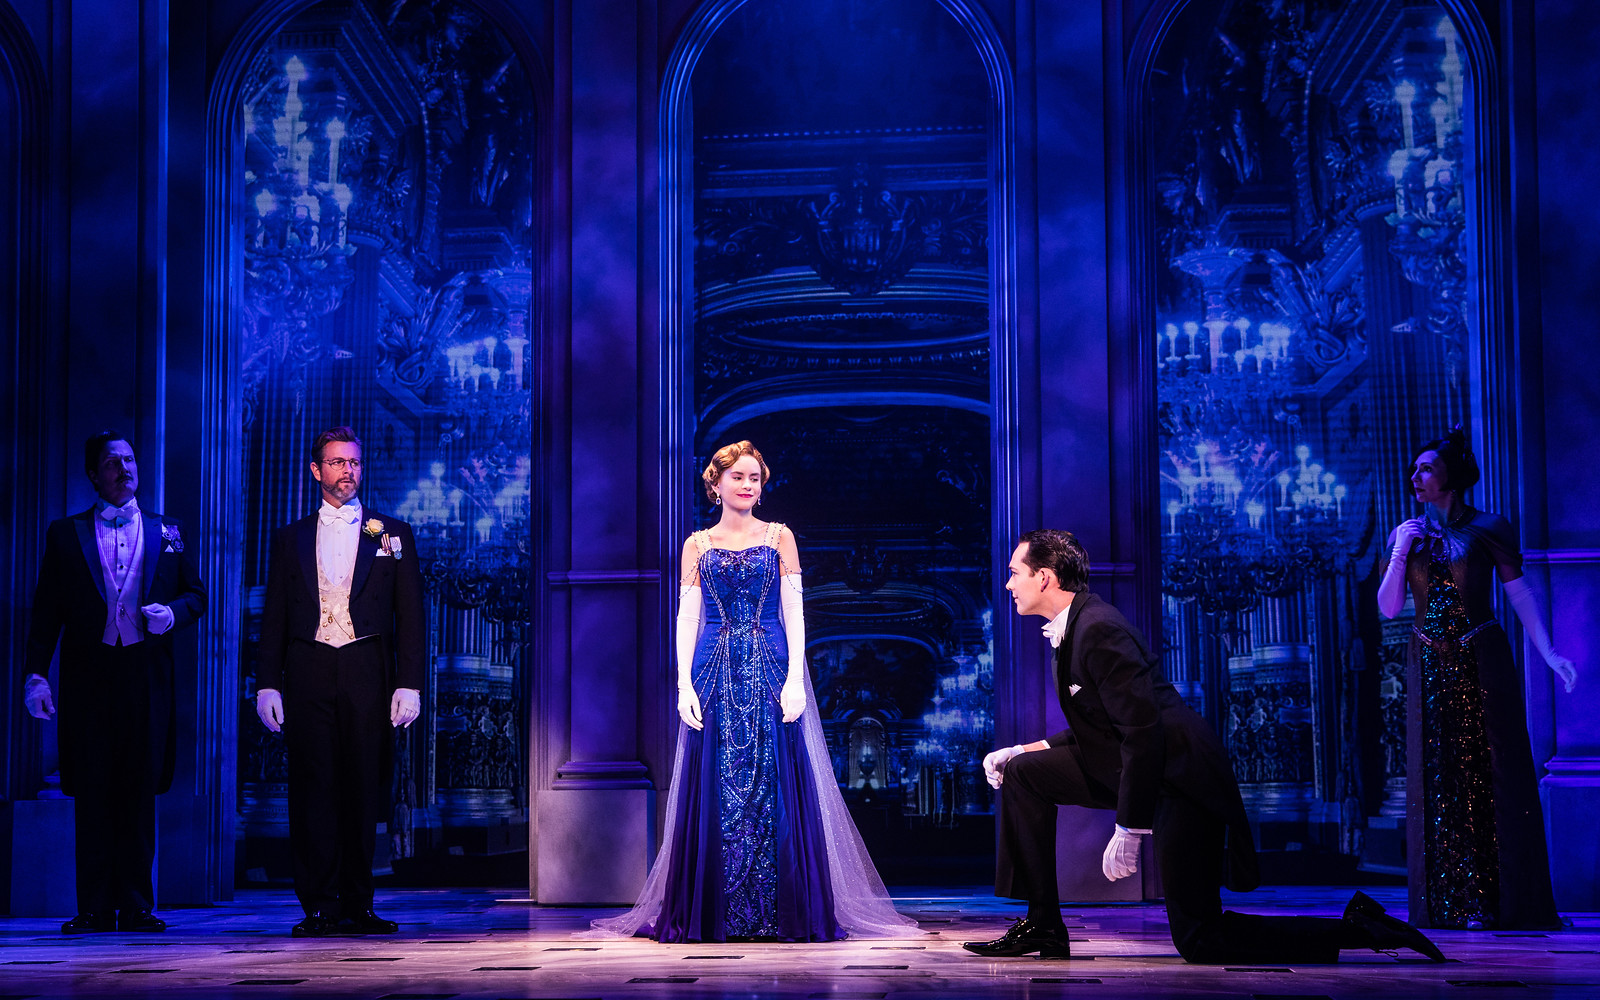 Press photo: Lila Coogan and the company in the national tour of Anastasia. Photo by Evan Zimmerman, MurphyMade.